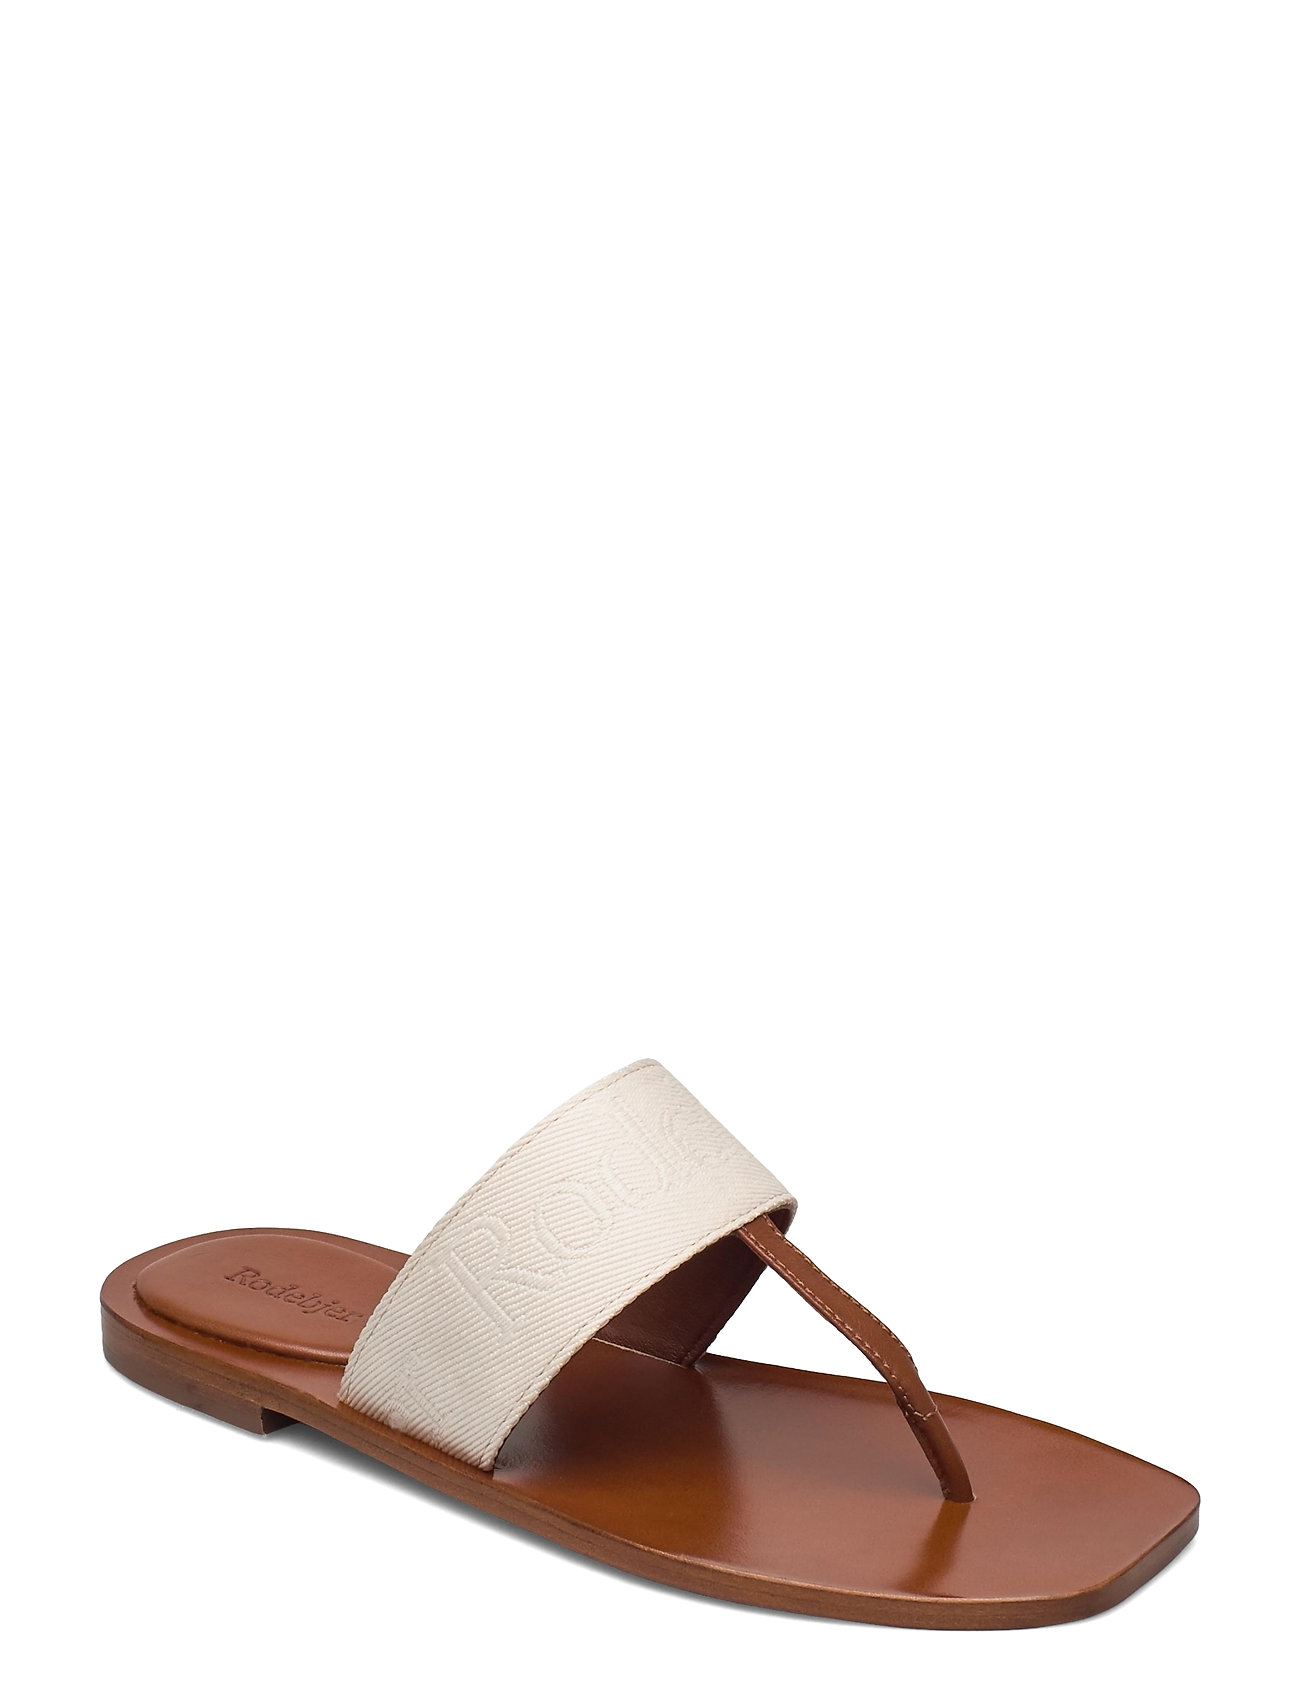 Rodebjer Roza Shoes Summer Shoes Flat Sandals Beige RODEBJER